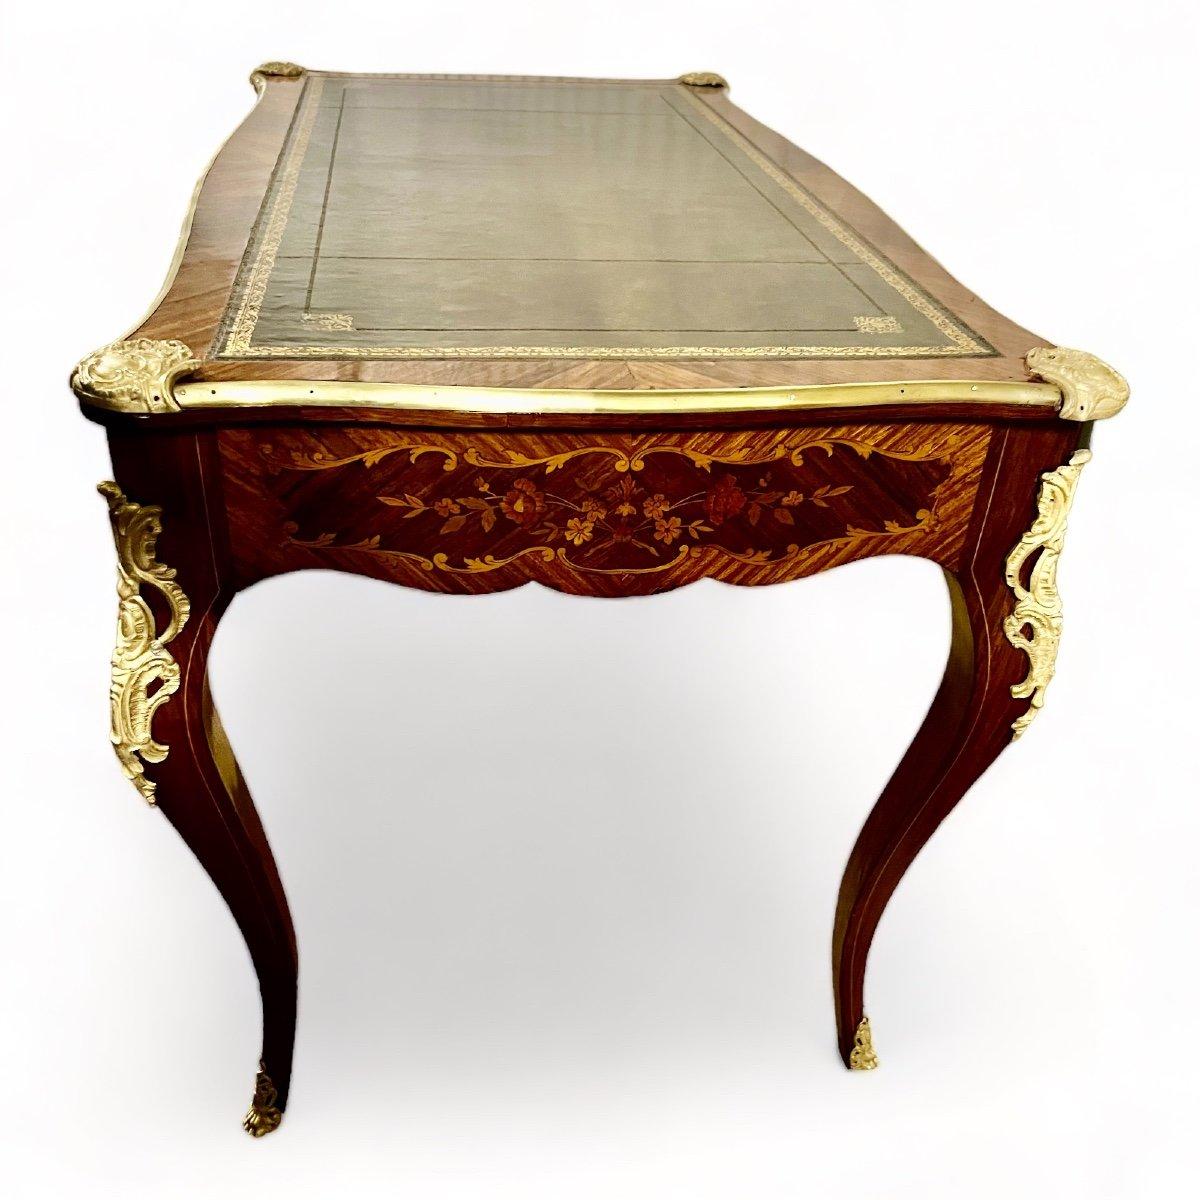 French 19th Century Louis XV-Style Marquetry Desk with Gilt Bronze Accents For Sale